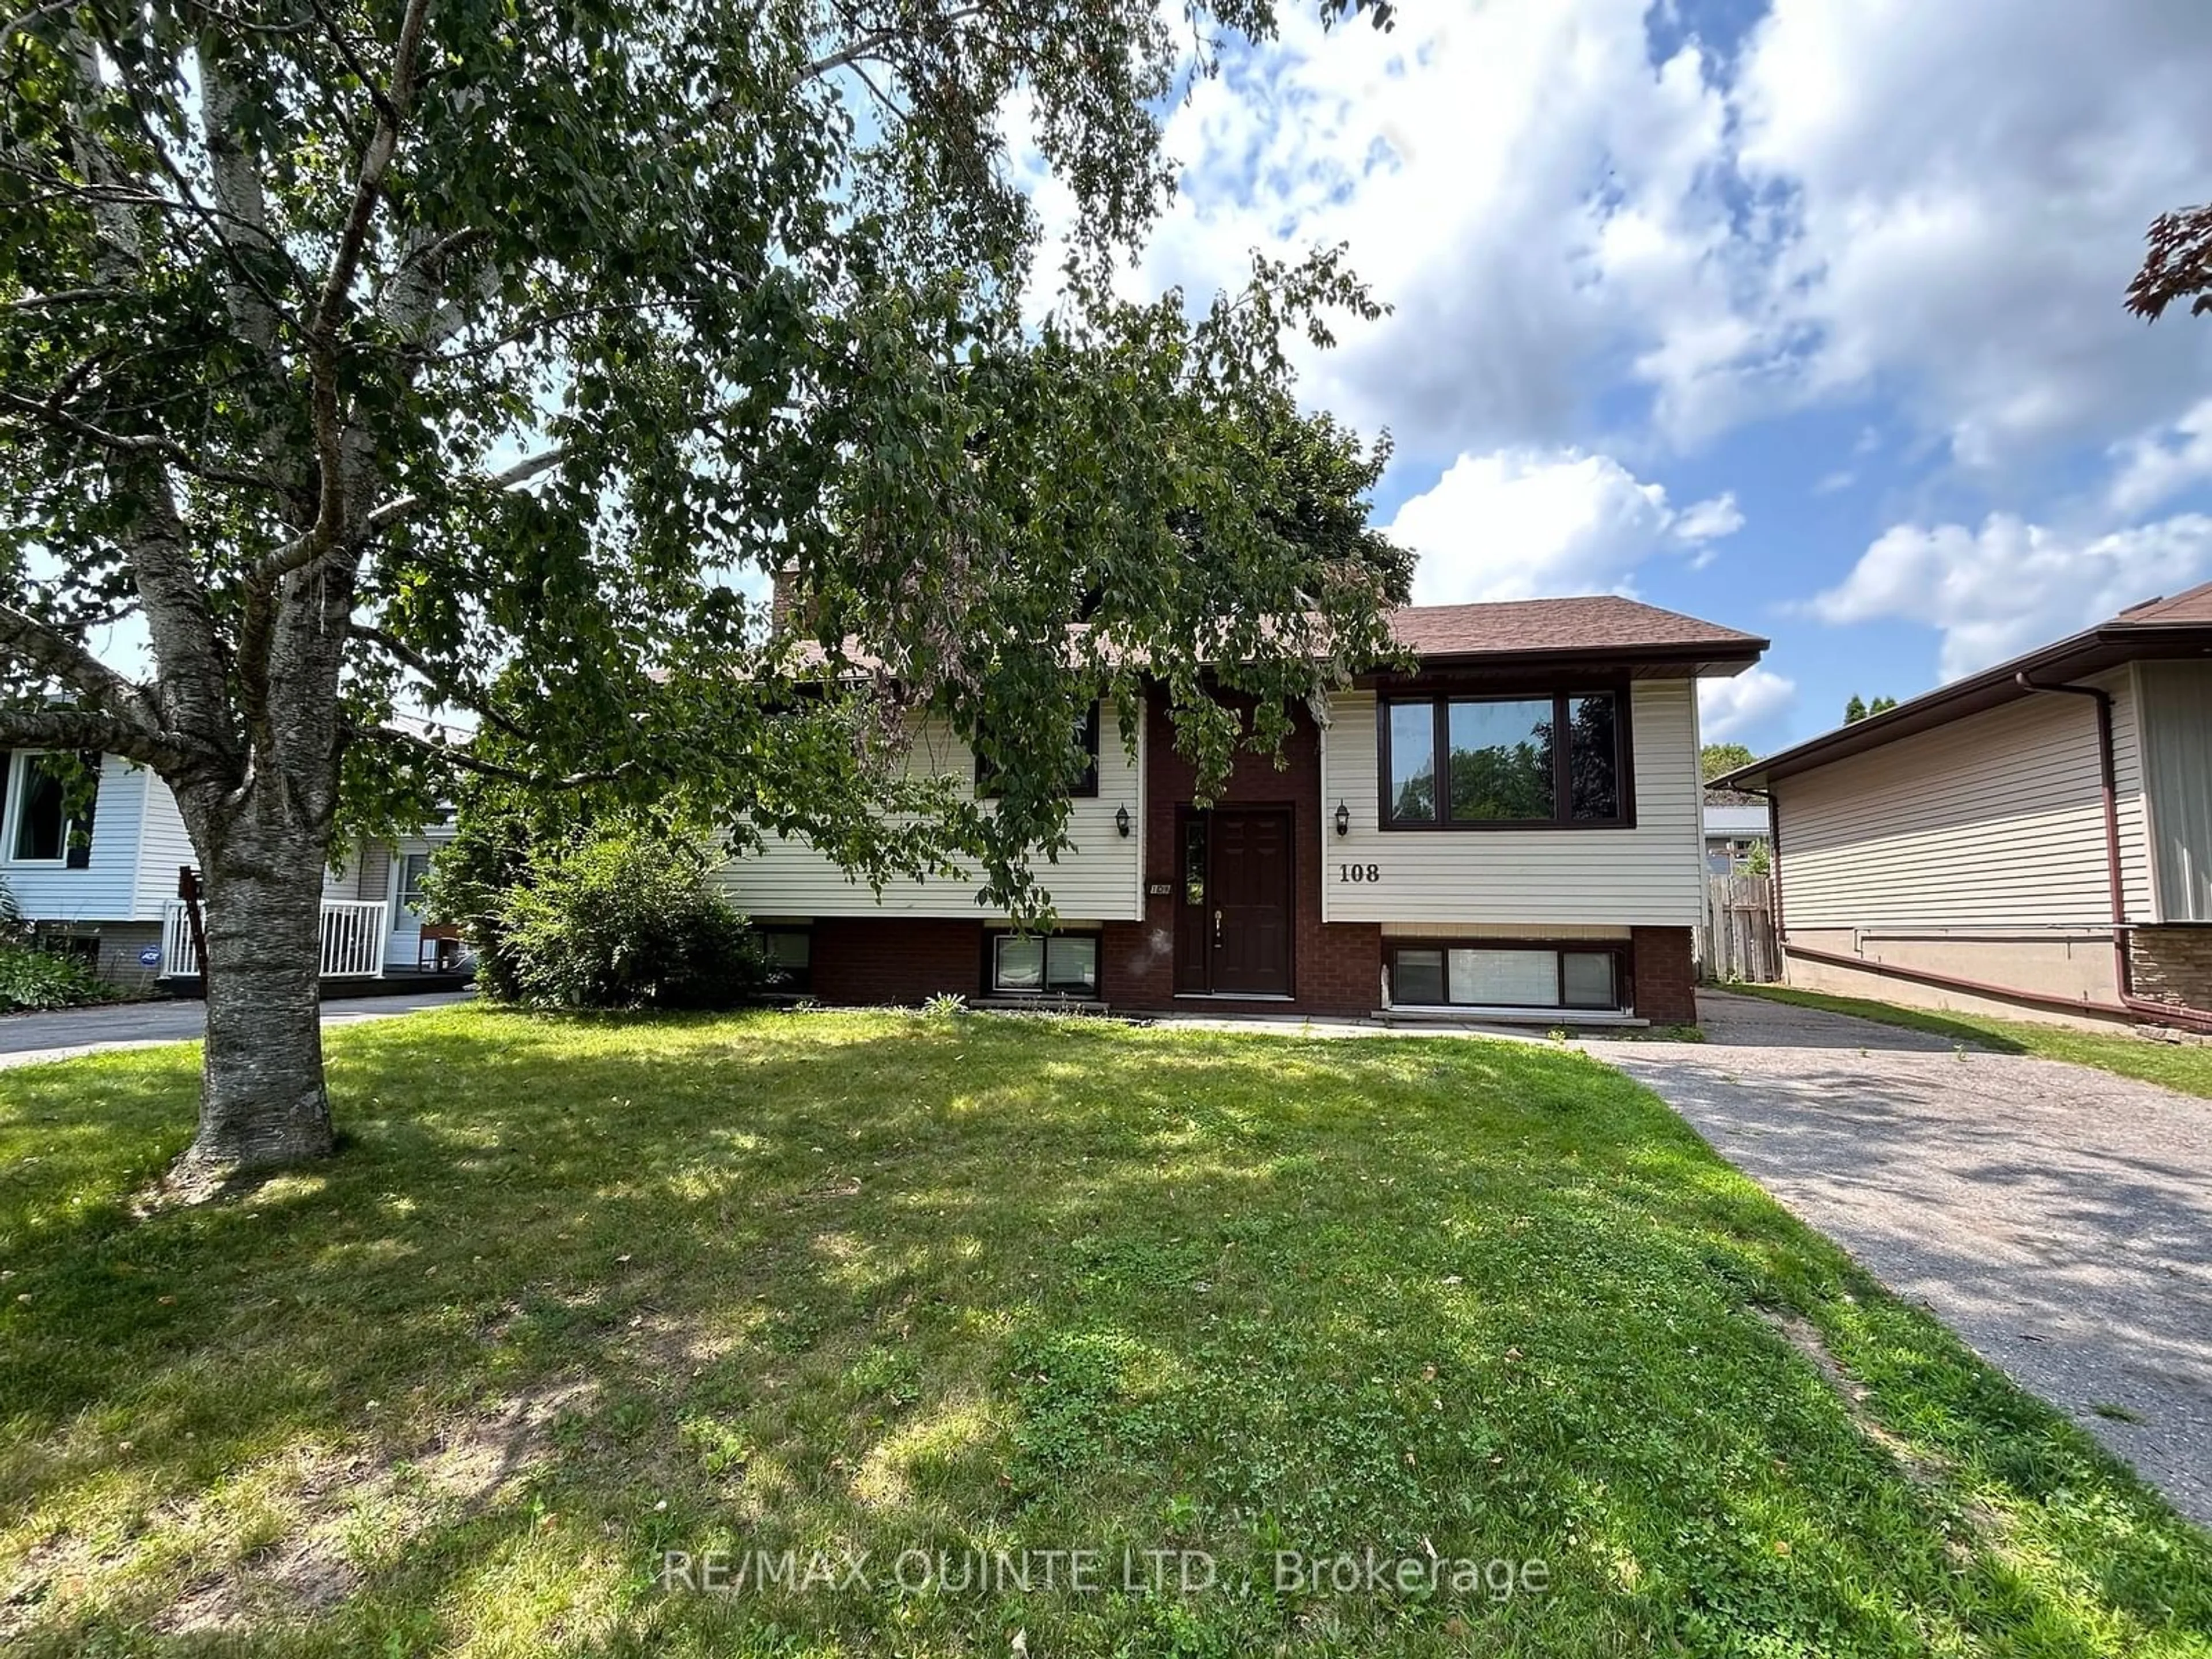 Frontside or backside of a home for 108 Nicholas St, Quinte West Ontario K8V 6B2